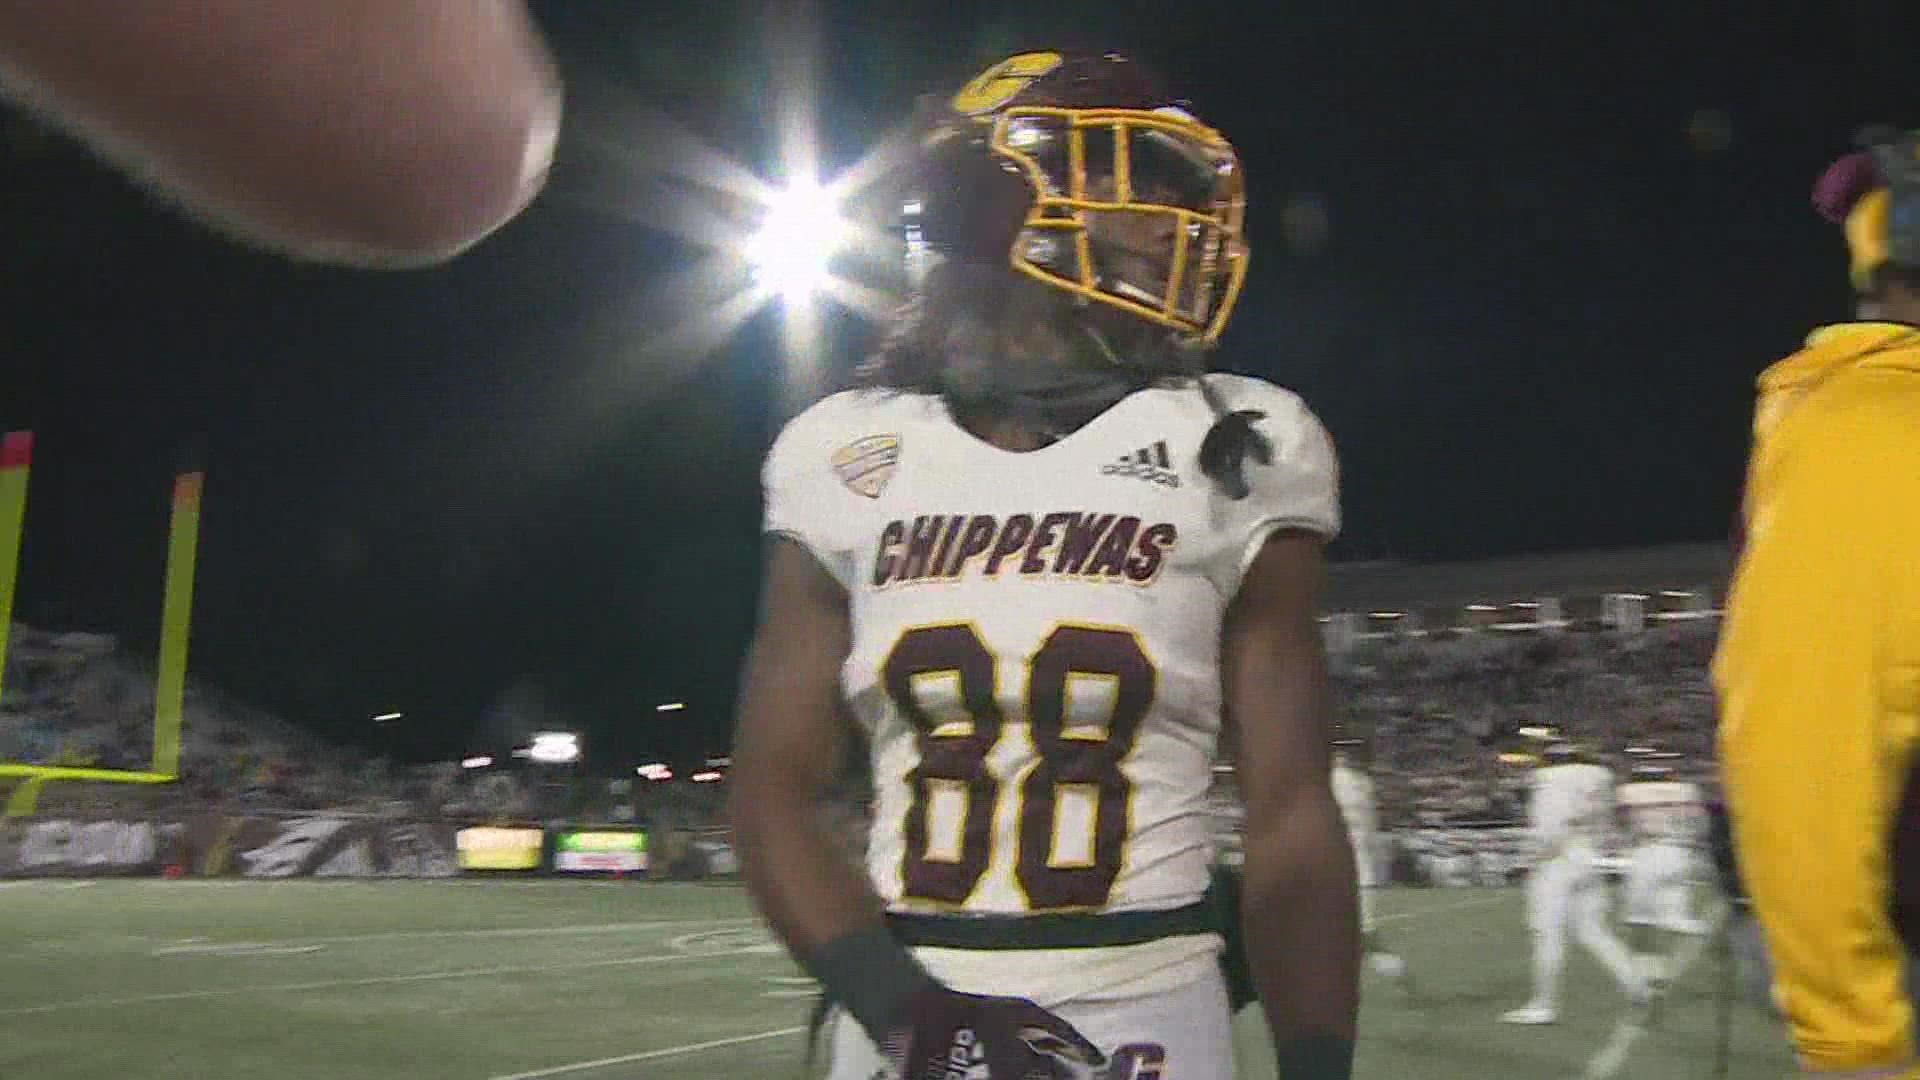 The Muskegon native will forgo his final year of eligibility at CMU.